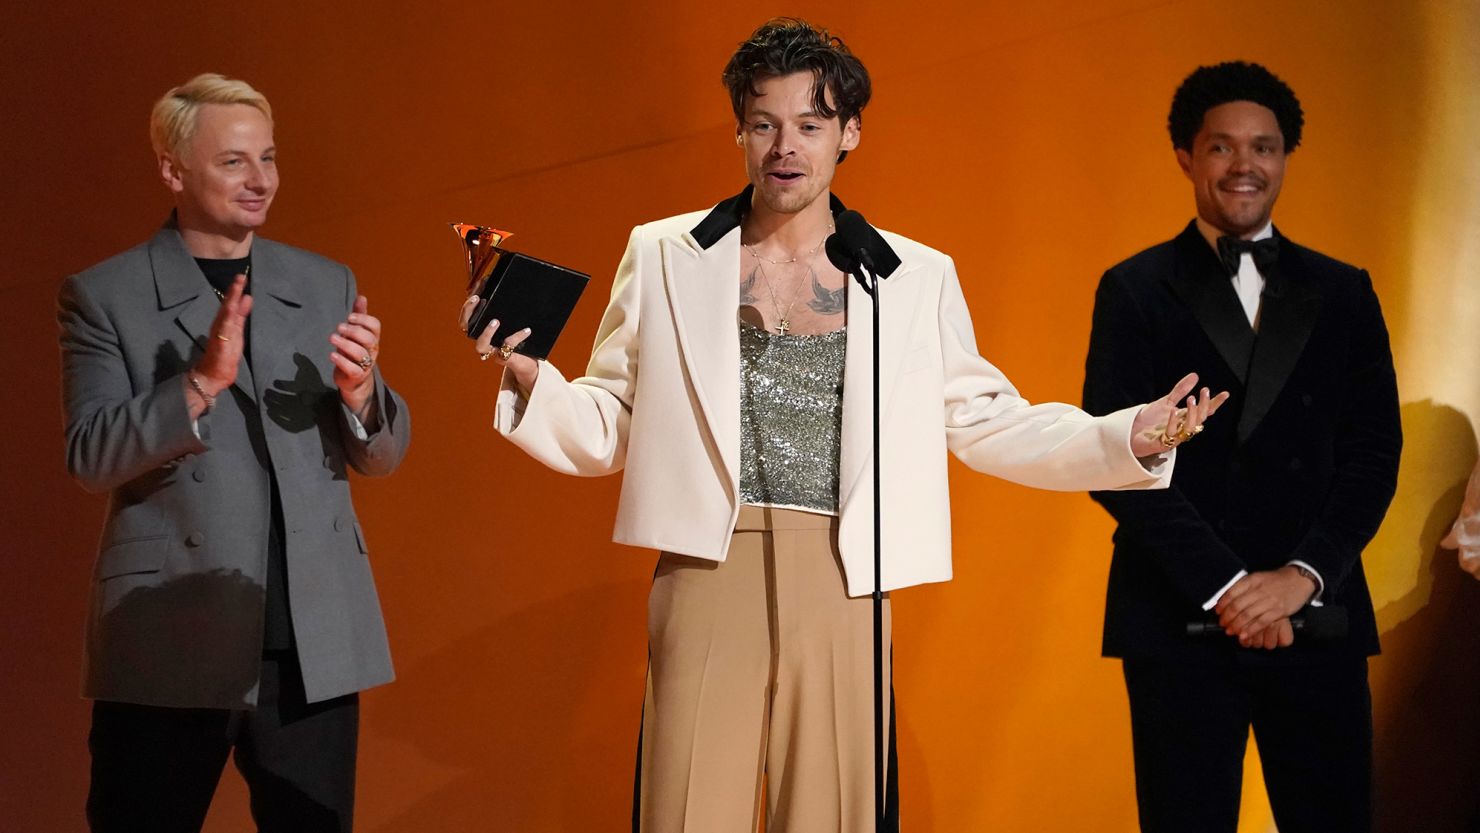 Harry Styles wins album of the year and other big moments from the Grammys